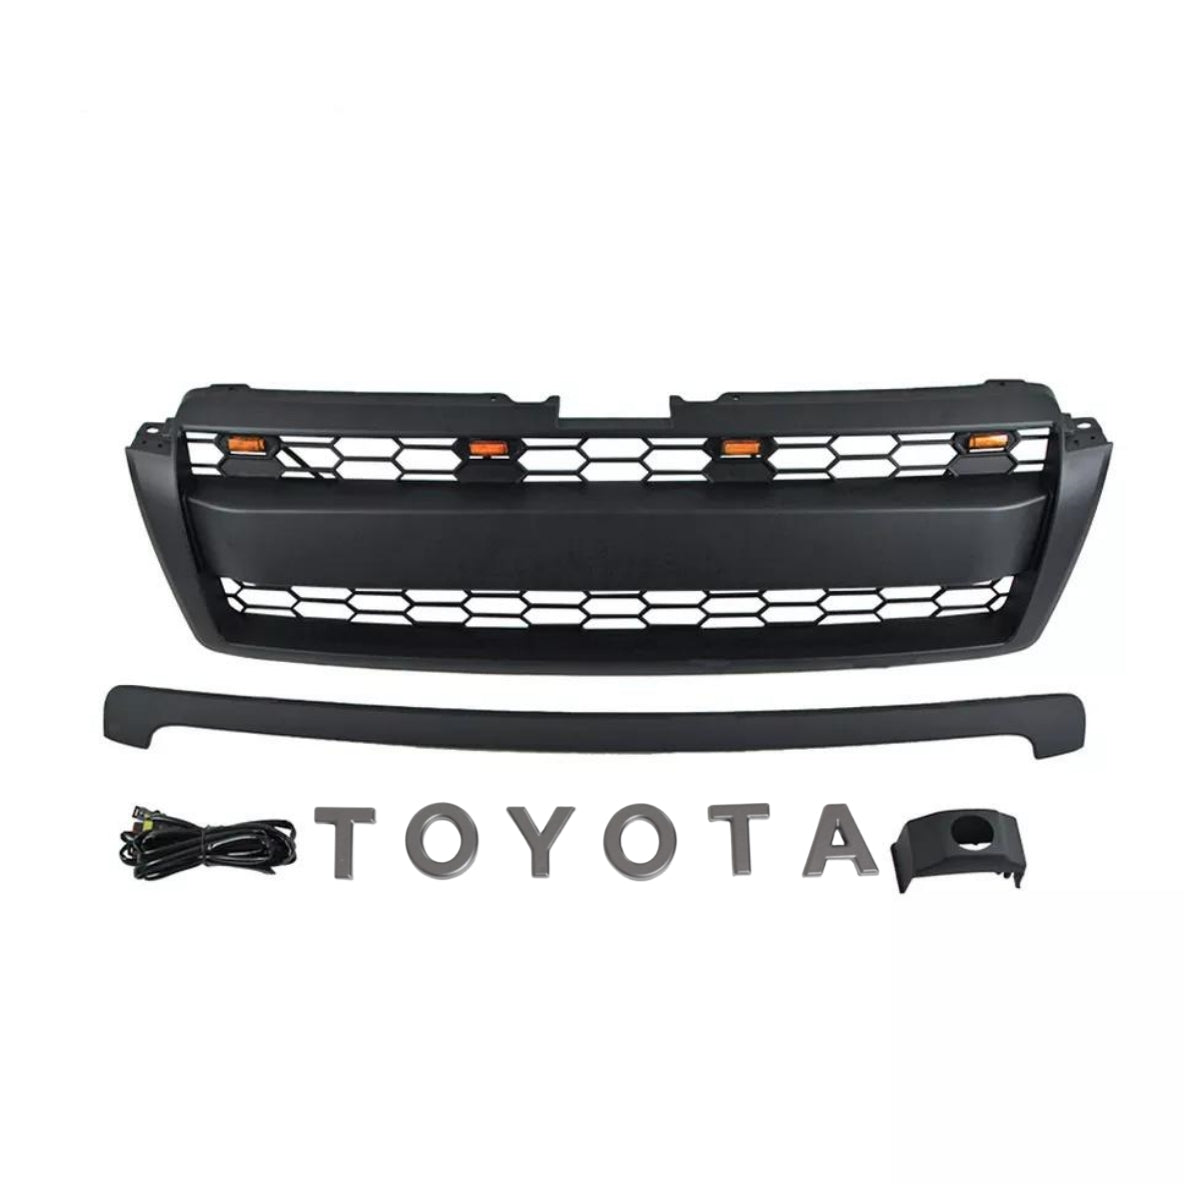 {WildWell}{Toyota Grill}-{Toyota Land Cruiser Grill 2010-2014/2}-Front